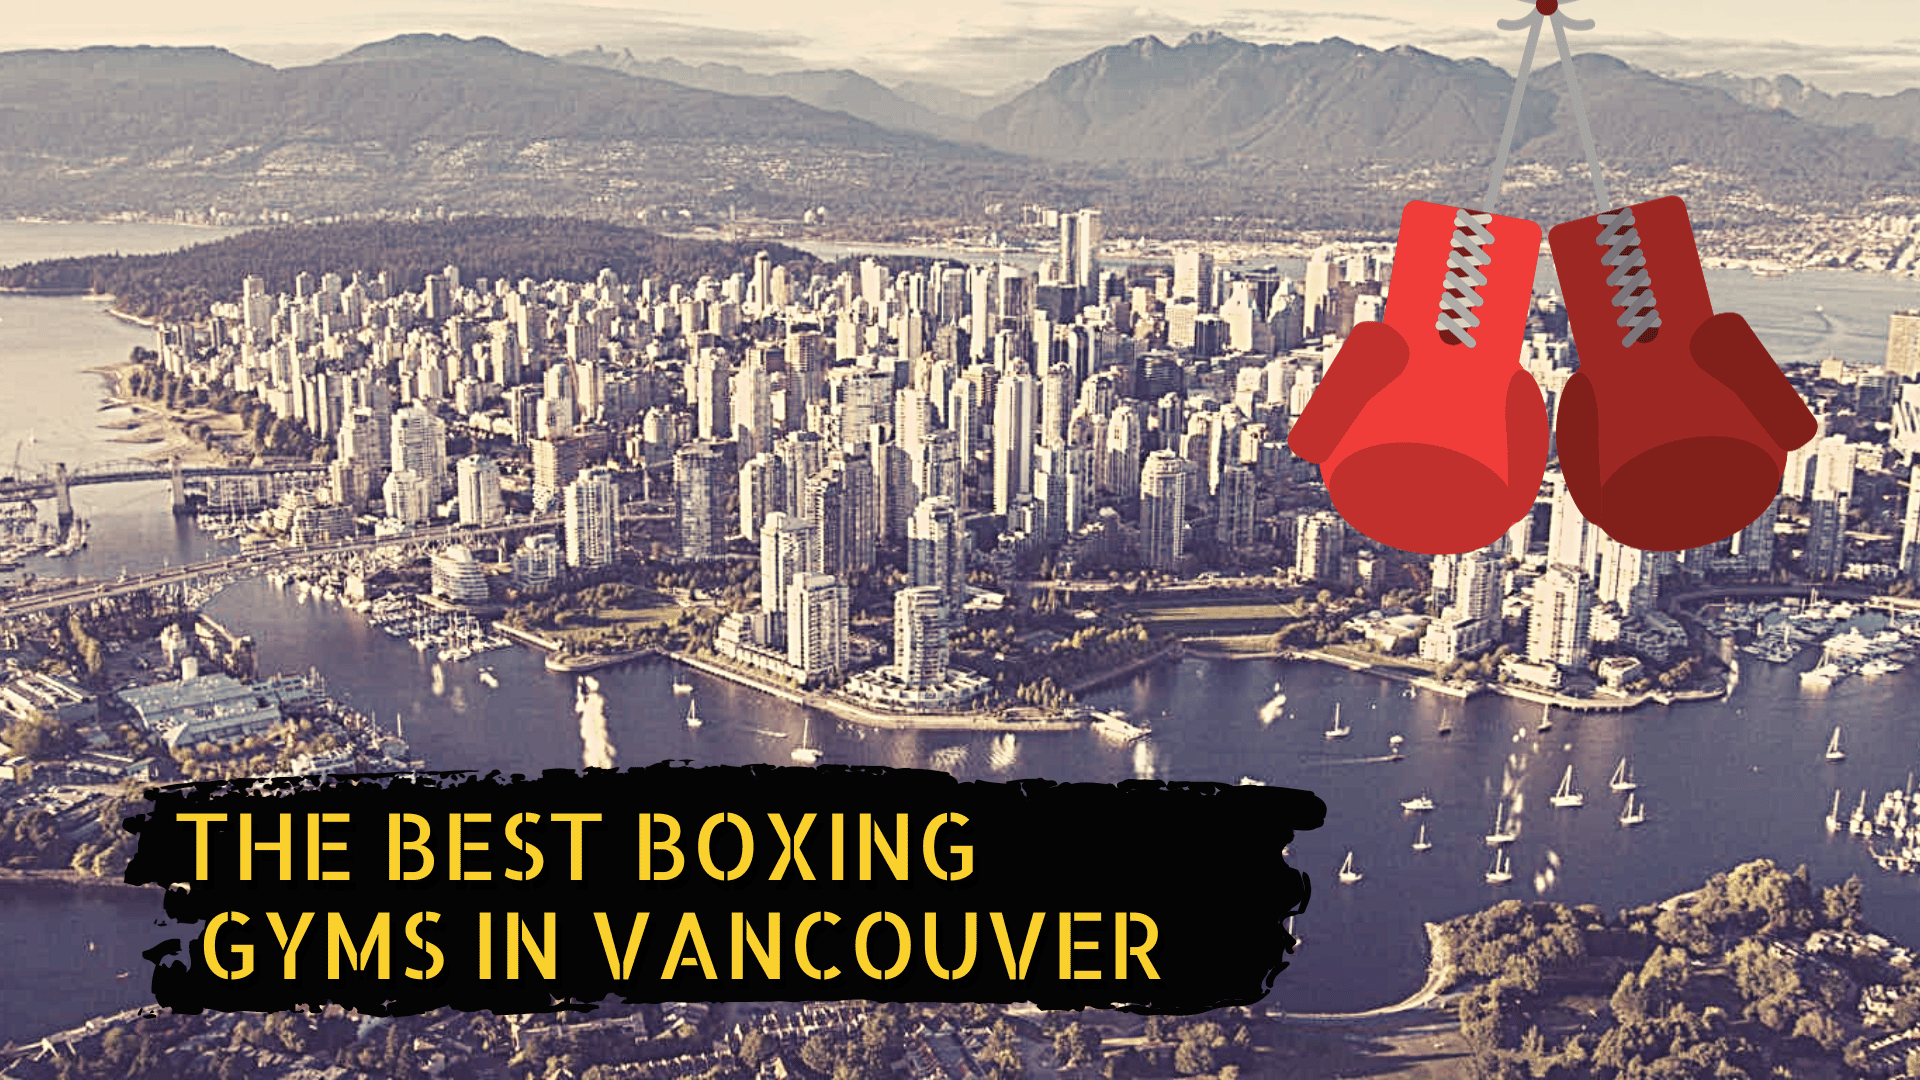 Vancouver skyline and and the title the best boxing gyms in Vancouver